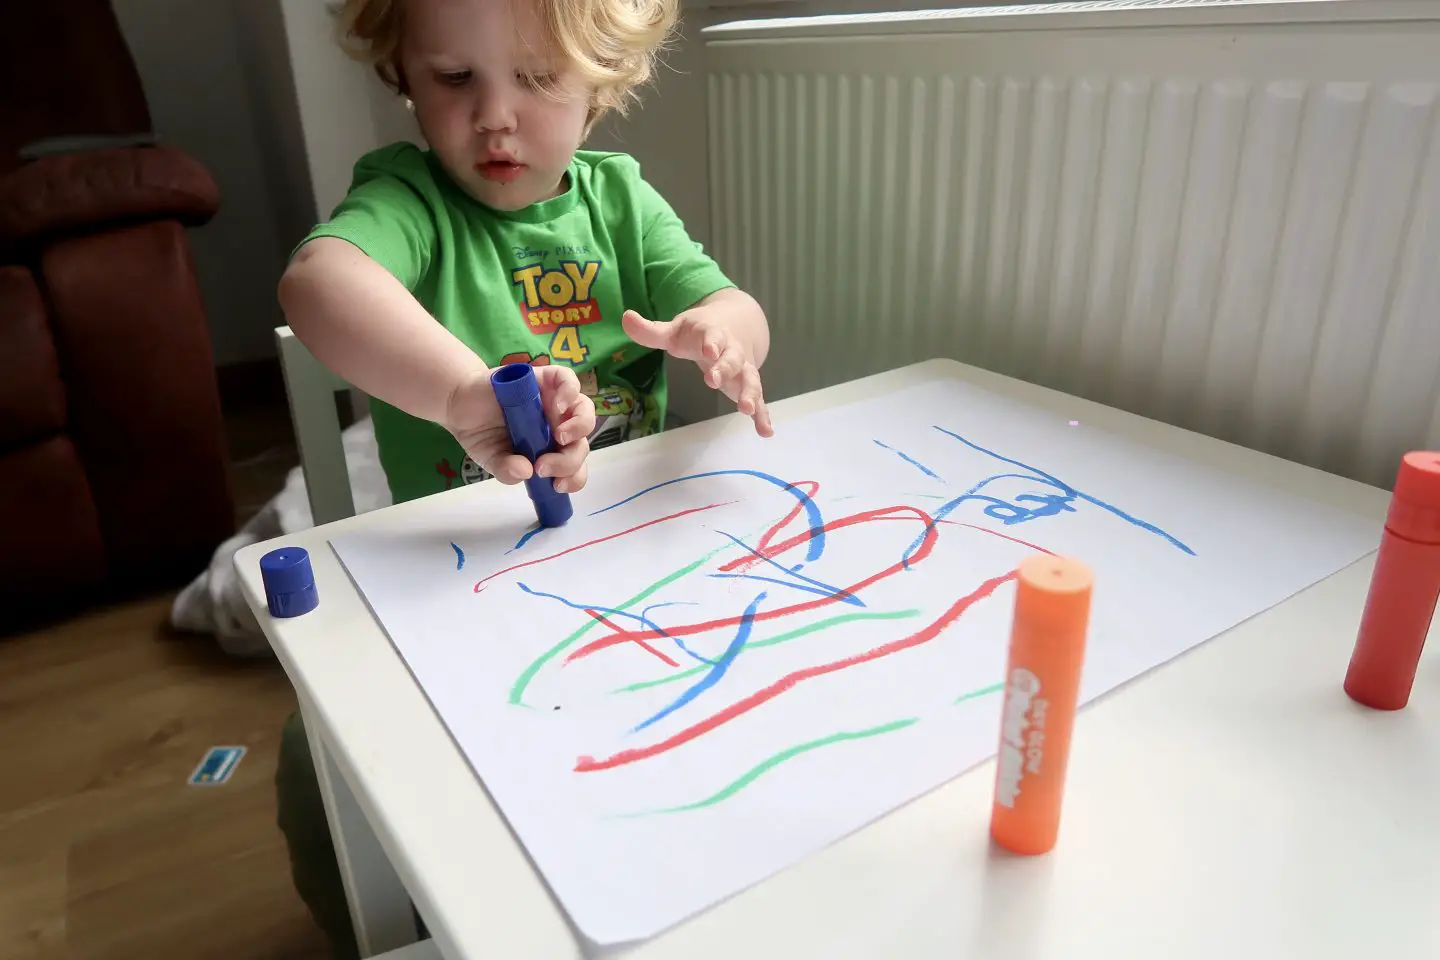 A toddler at a little table painting on paper with paint sticks